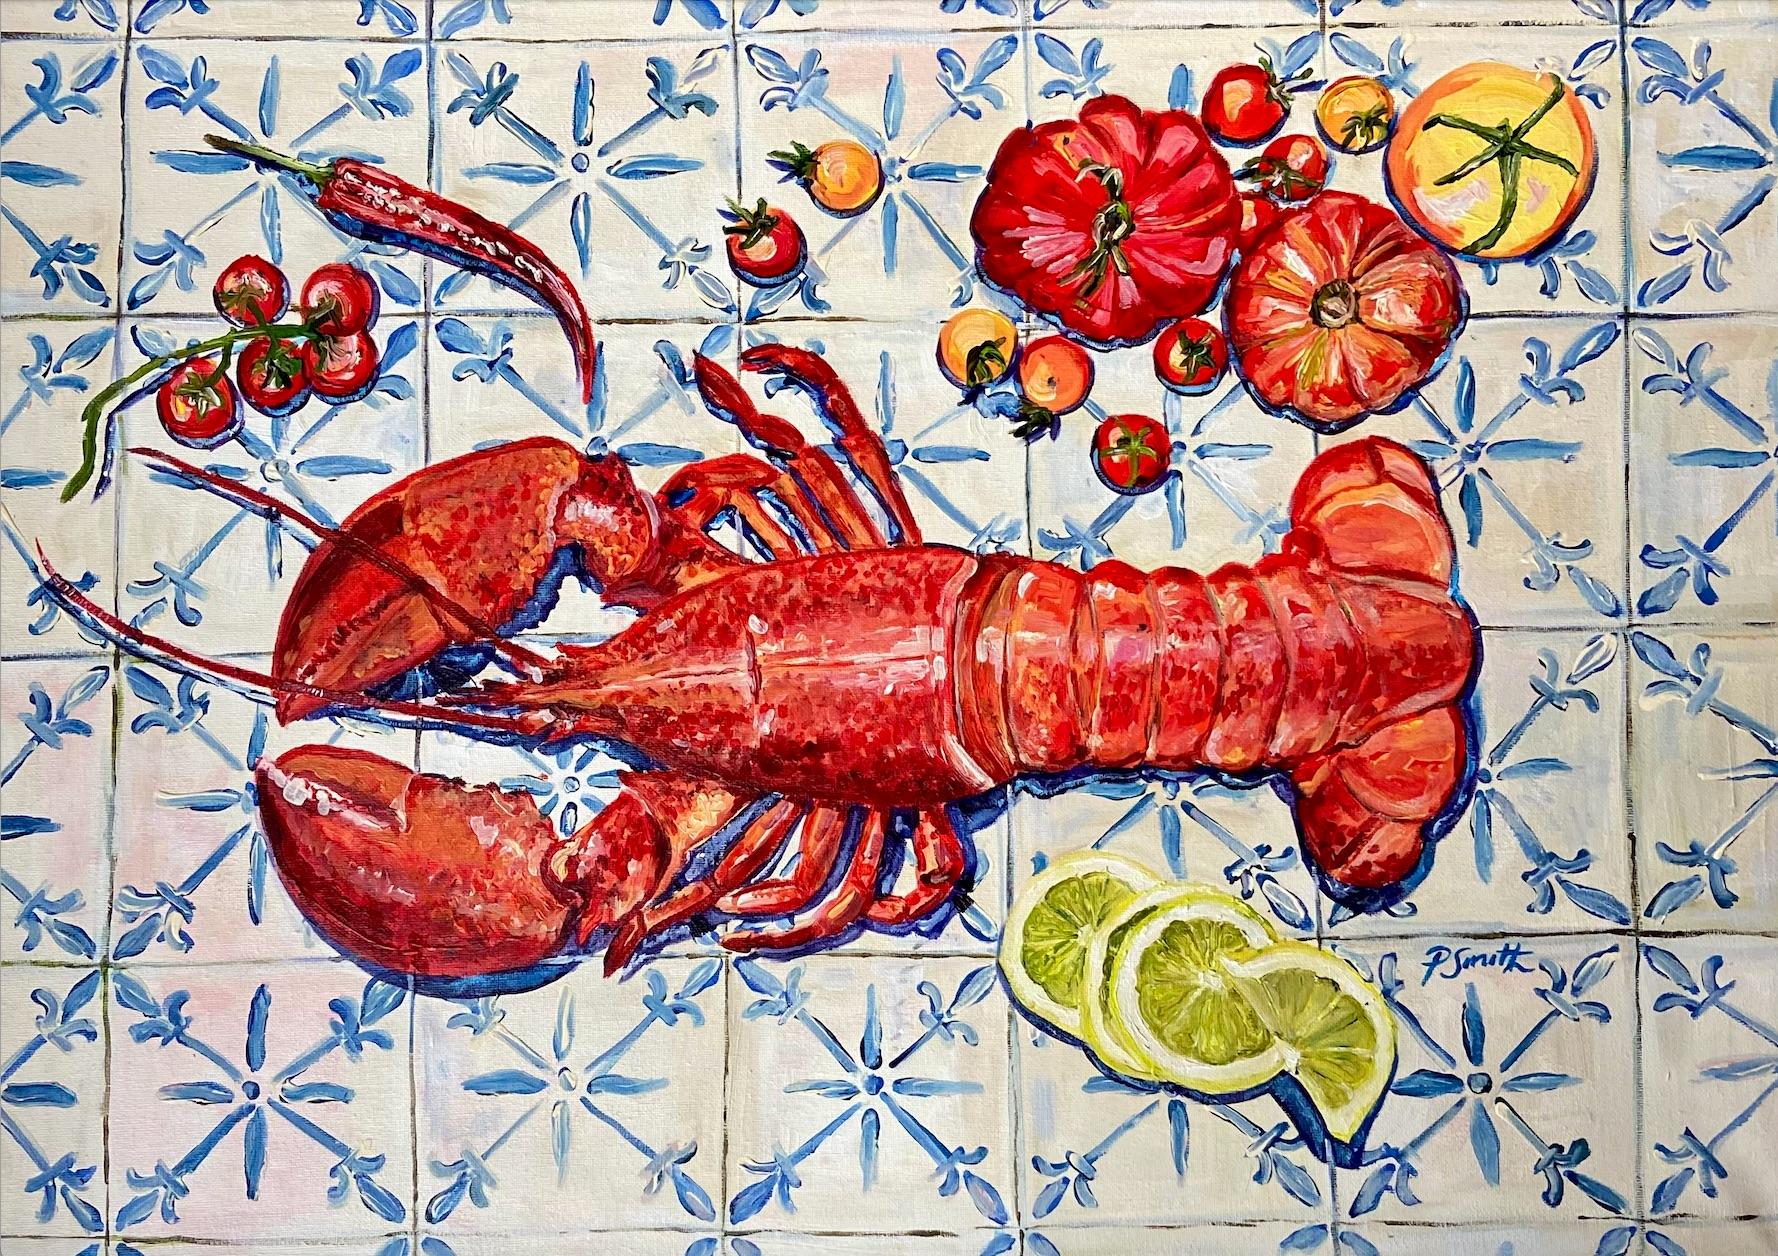 Pippa Smith Still-Life Painting - The Italian Table, Lobster, Original painting, Food art, Seafood, Mediterranean